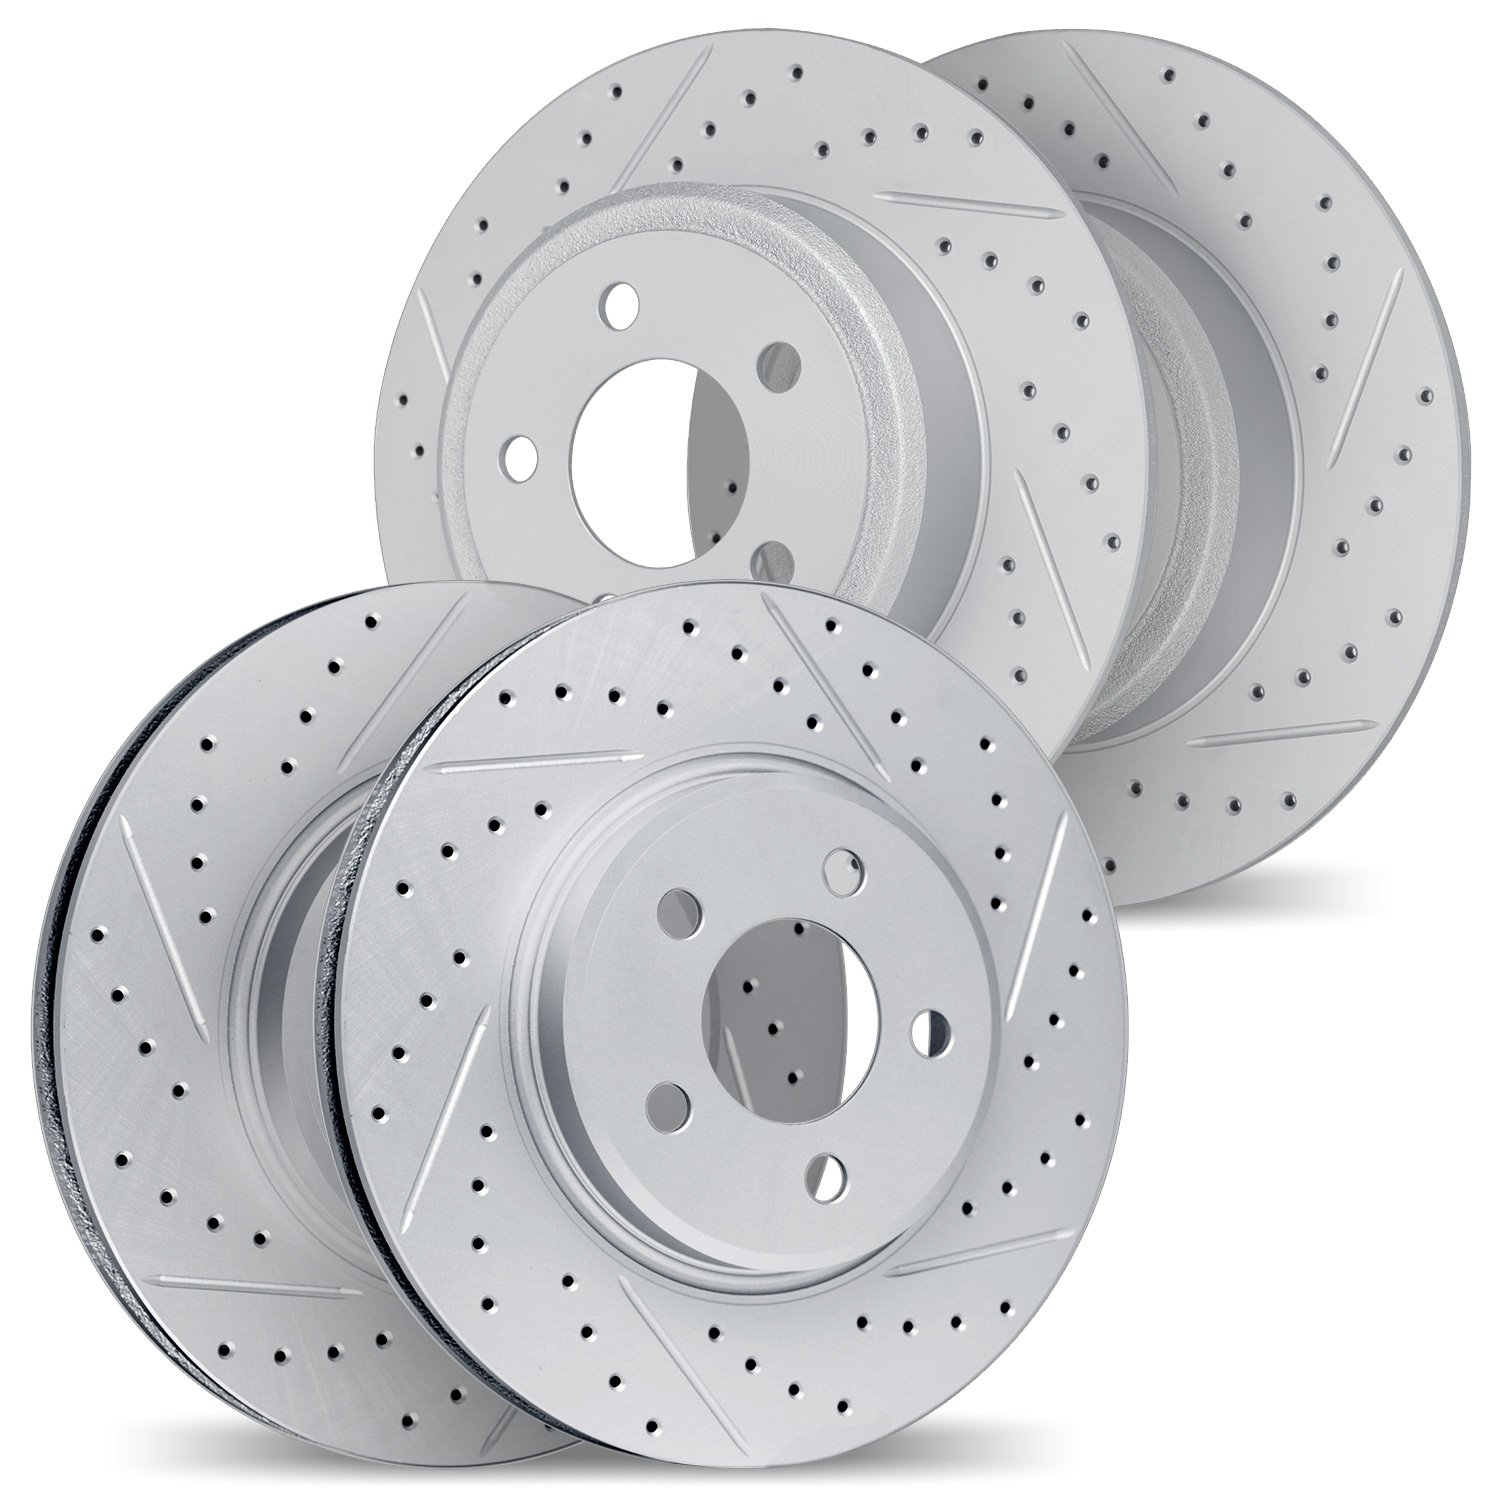 2004-03034 Geoperformance Drilled/Slotted Brake Rotors, Fits Select Kia/Hyundai/Genesis, Position: Front and Rear